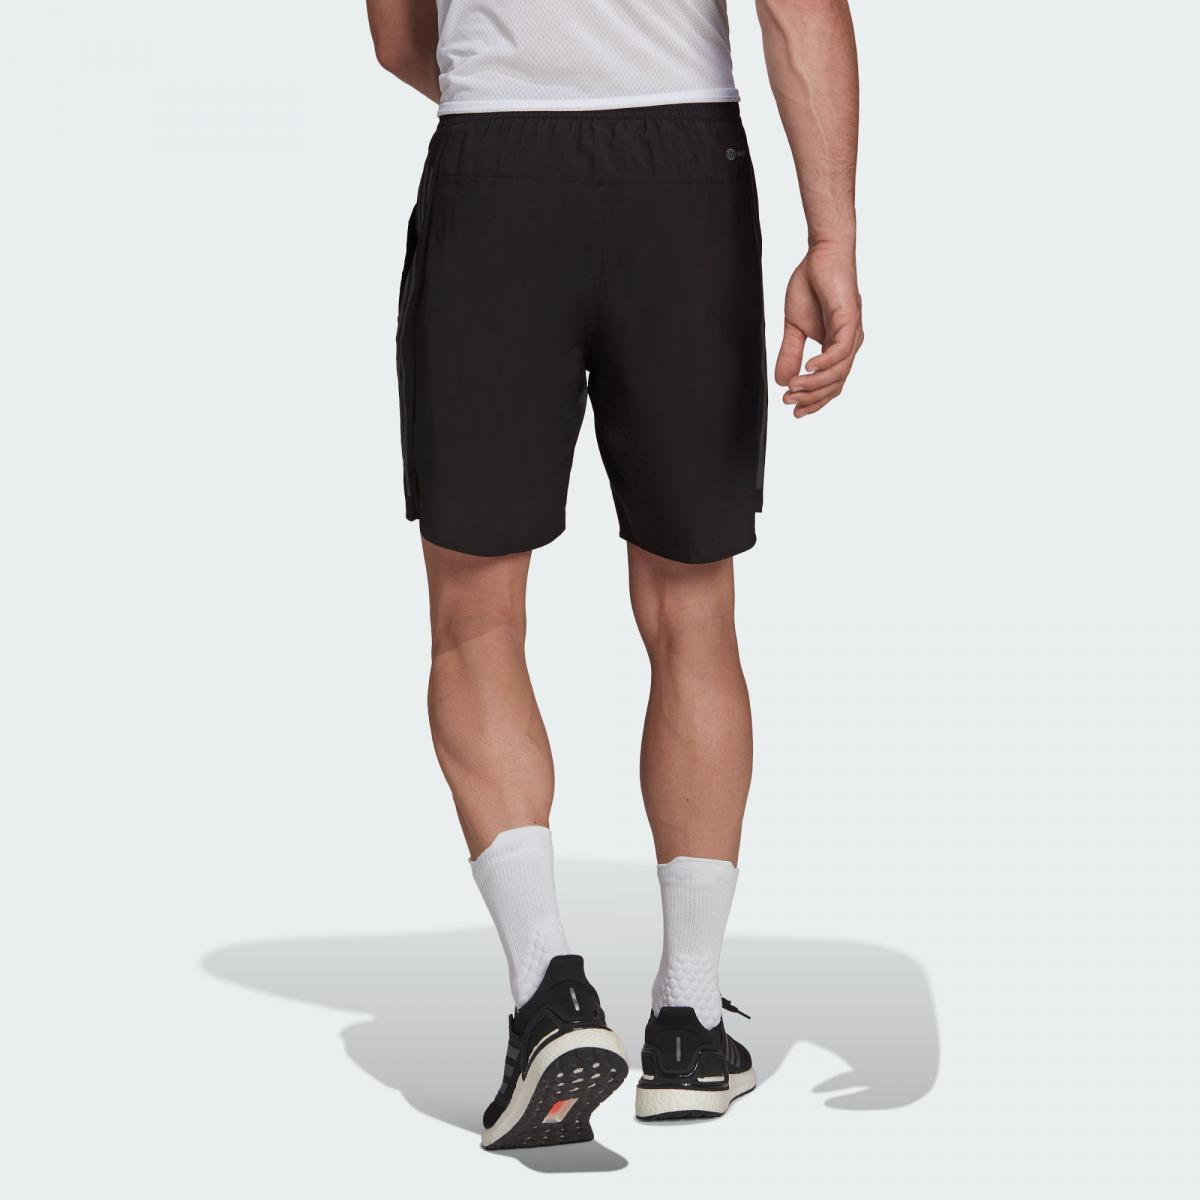 adidas | Adult ICON FULL REFLECTIVE 3-STRIPES SHORTS | Color : Black | Size : A/S5” | HKTVmall The Largest HK Platform